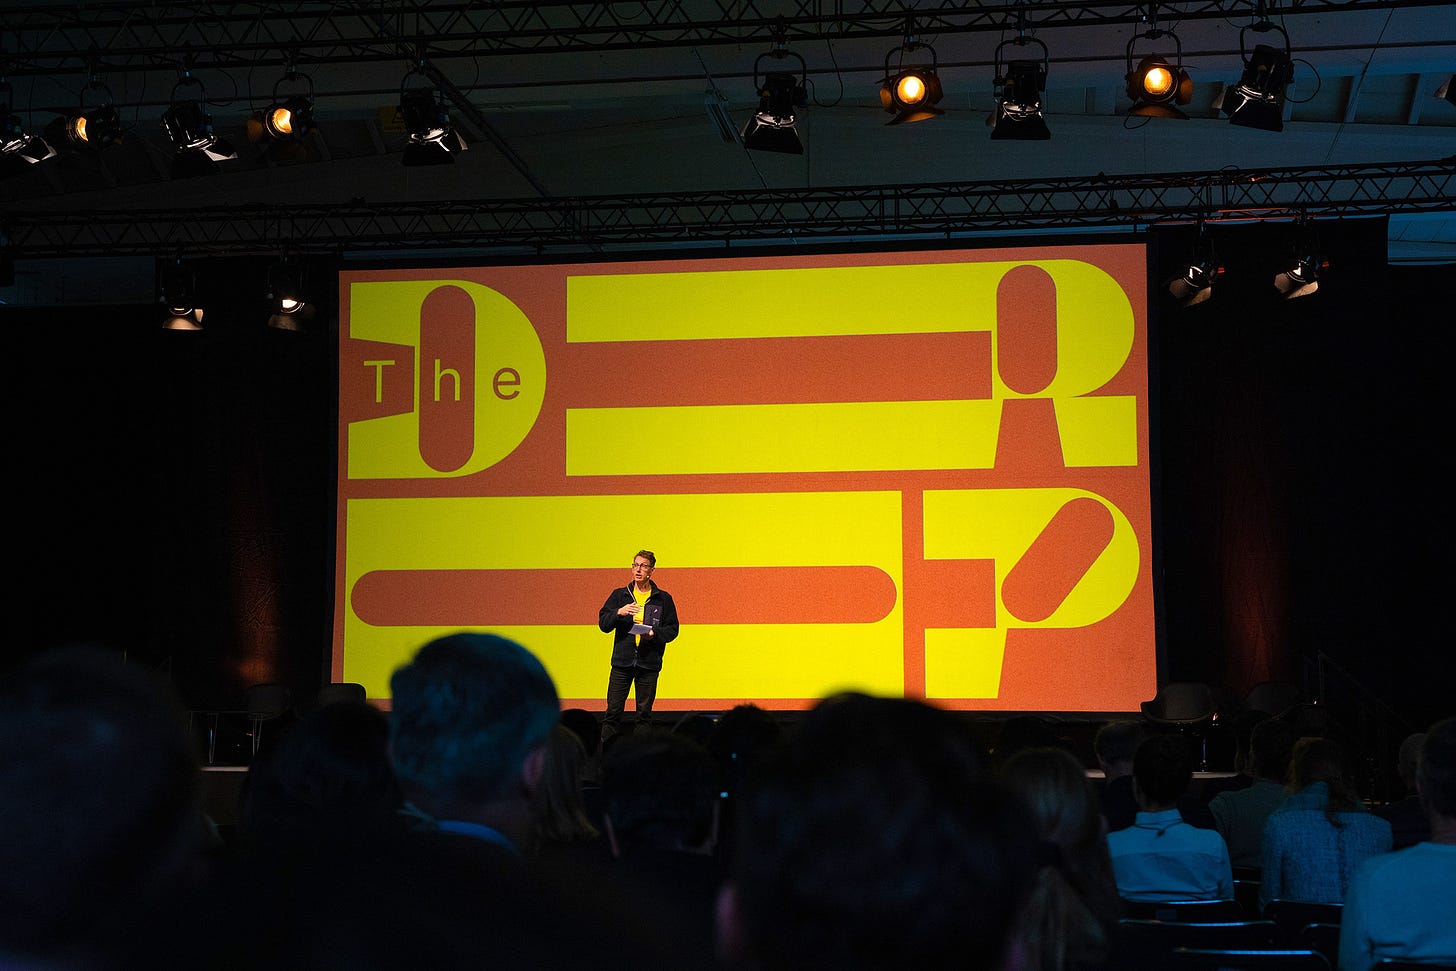 Hampus Jakobsson speaks to a large crowd on the main stage of The Drop conference in Malmö, Sweden, in September 2022.